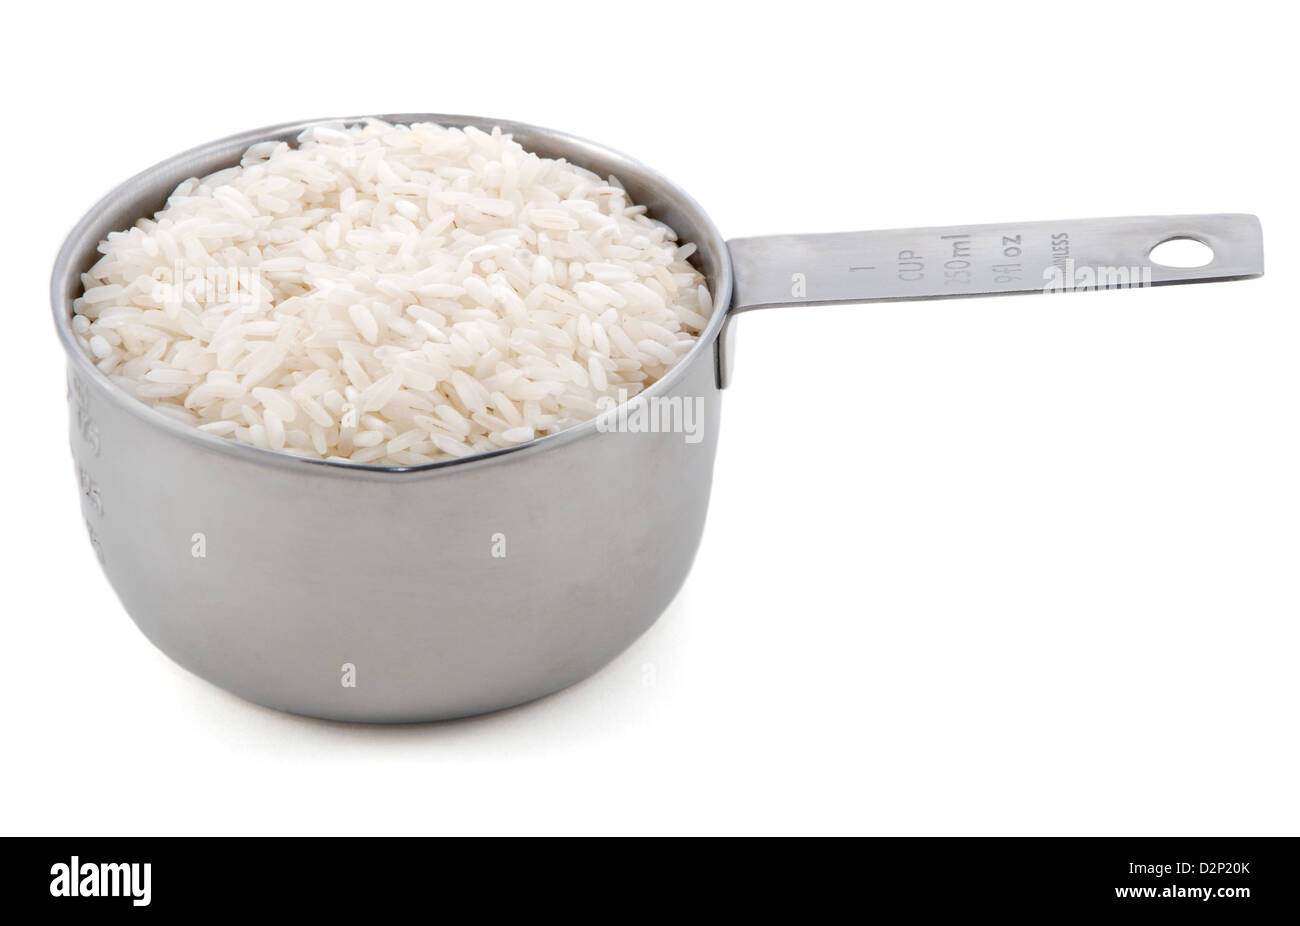 White long grain rice presented in an American metal cup measure, isolated on a white background Stock Photo